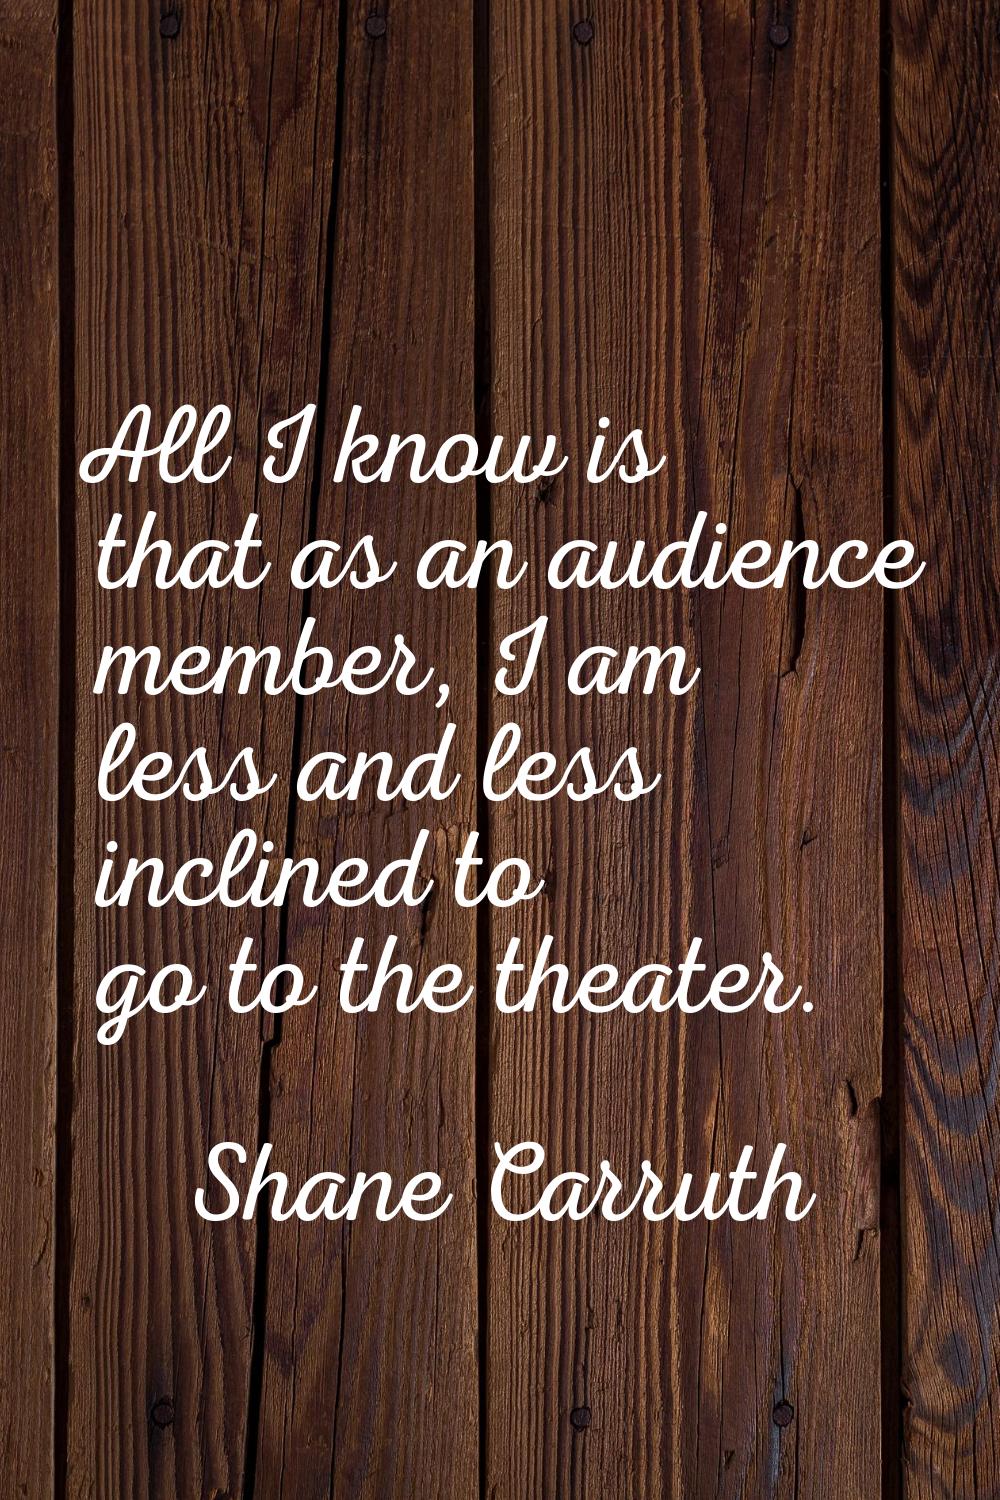 All I know is that as an audience member, I am less and less inclined to go to the theater.